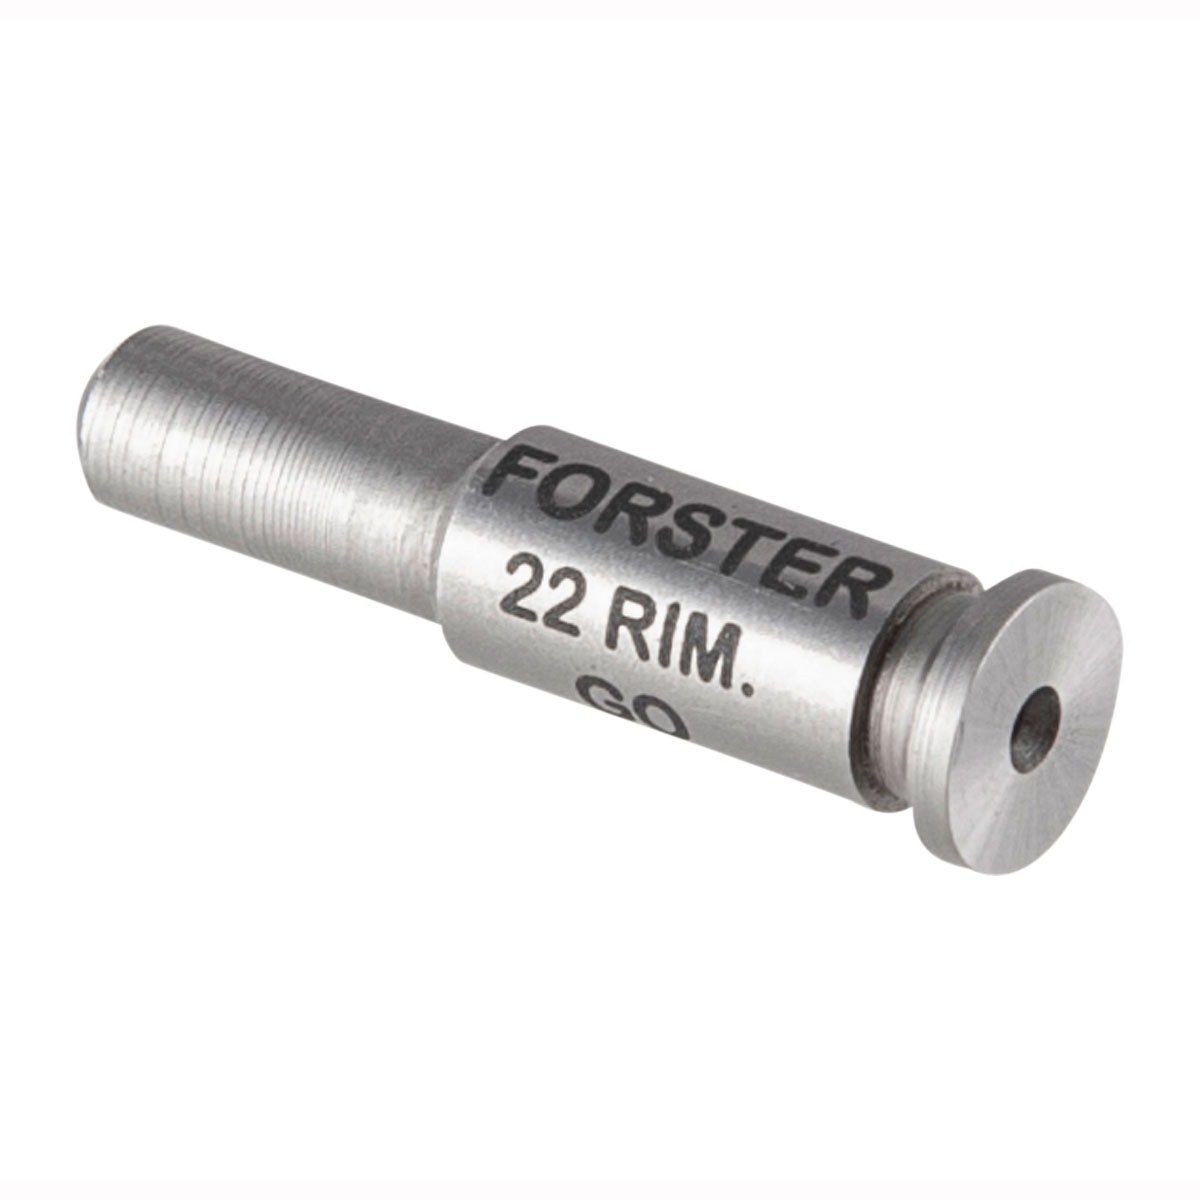 HG3006G Chamber Headspace Gauge 30-06 Go for sale online Forster Products 